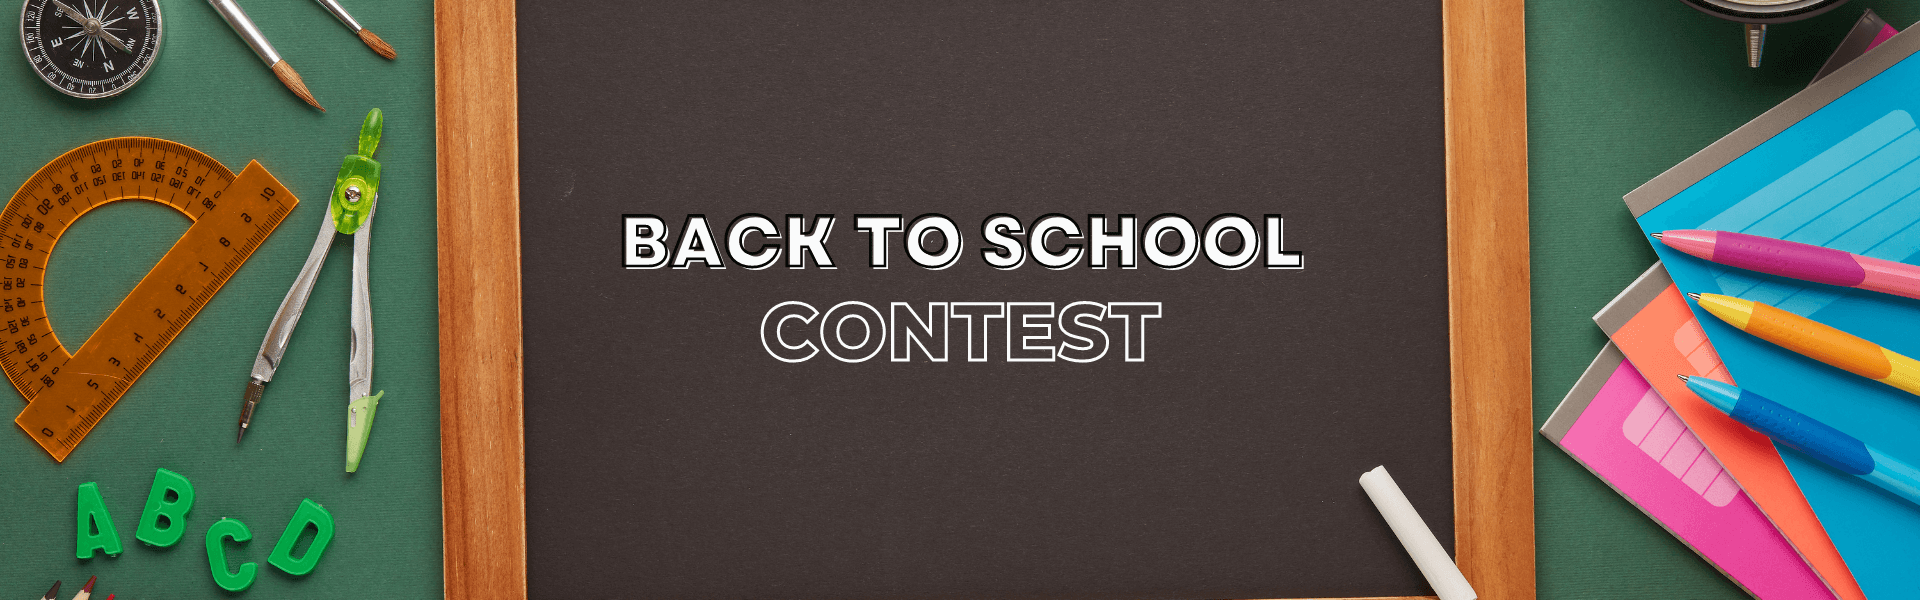 Back to school contest